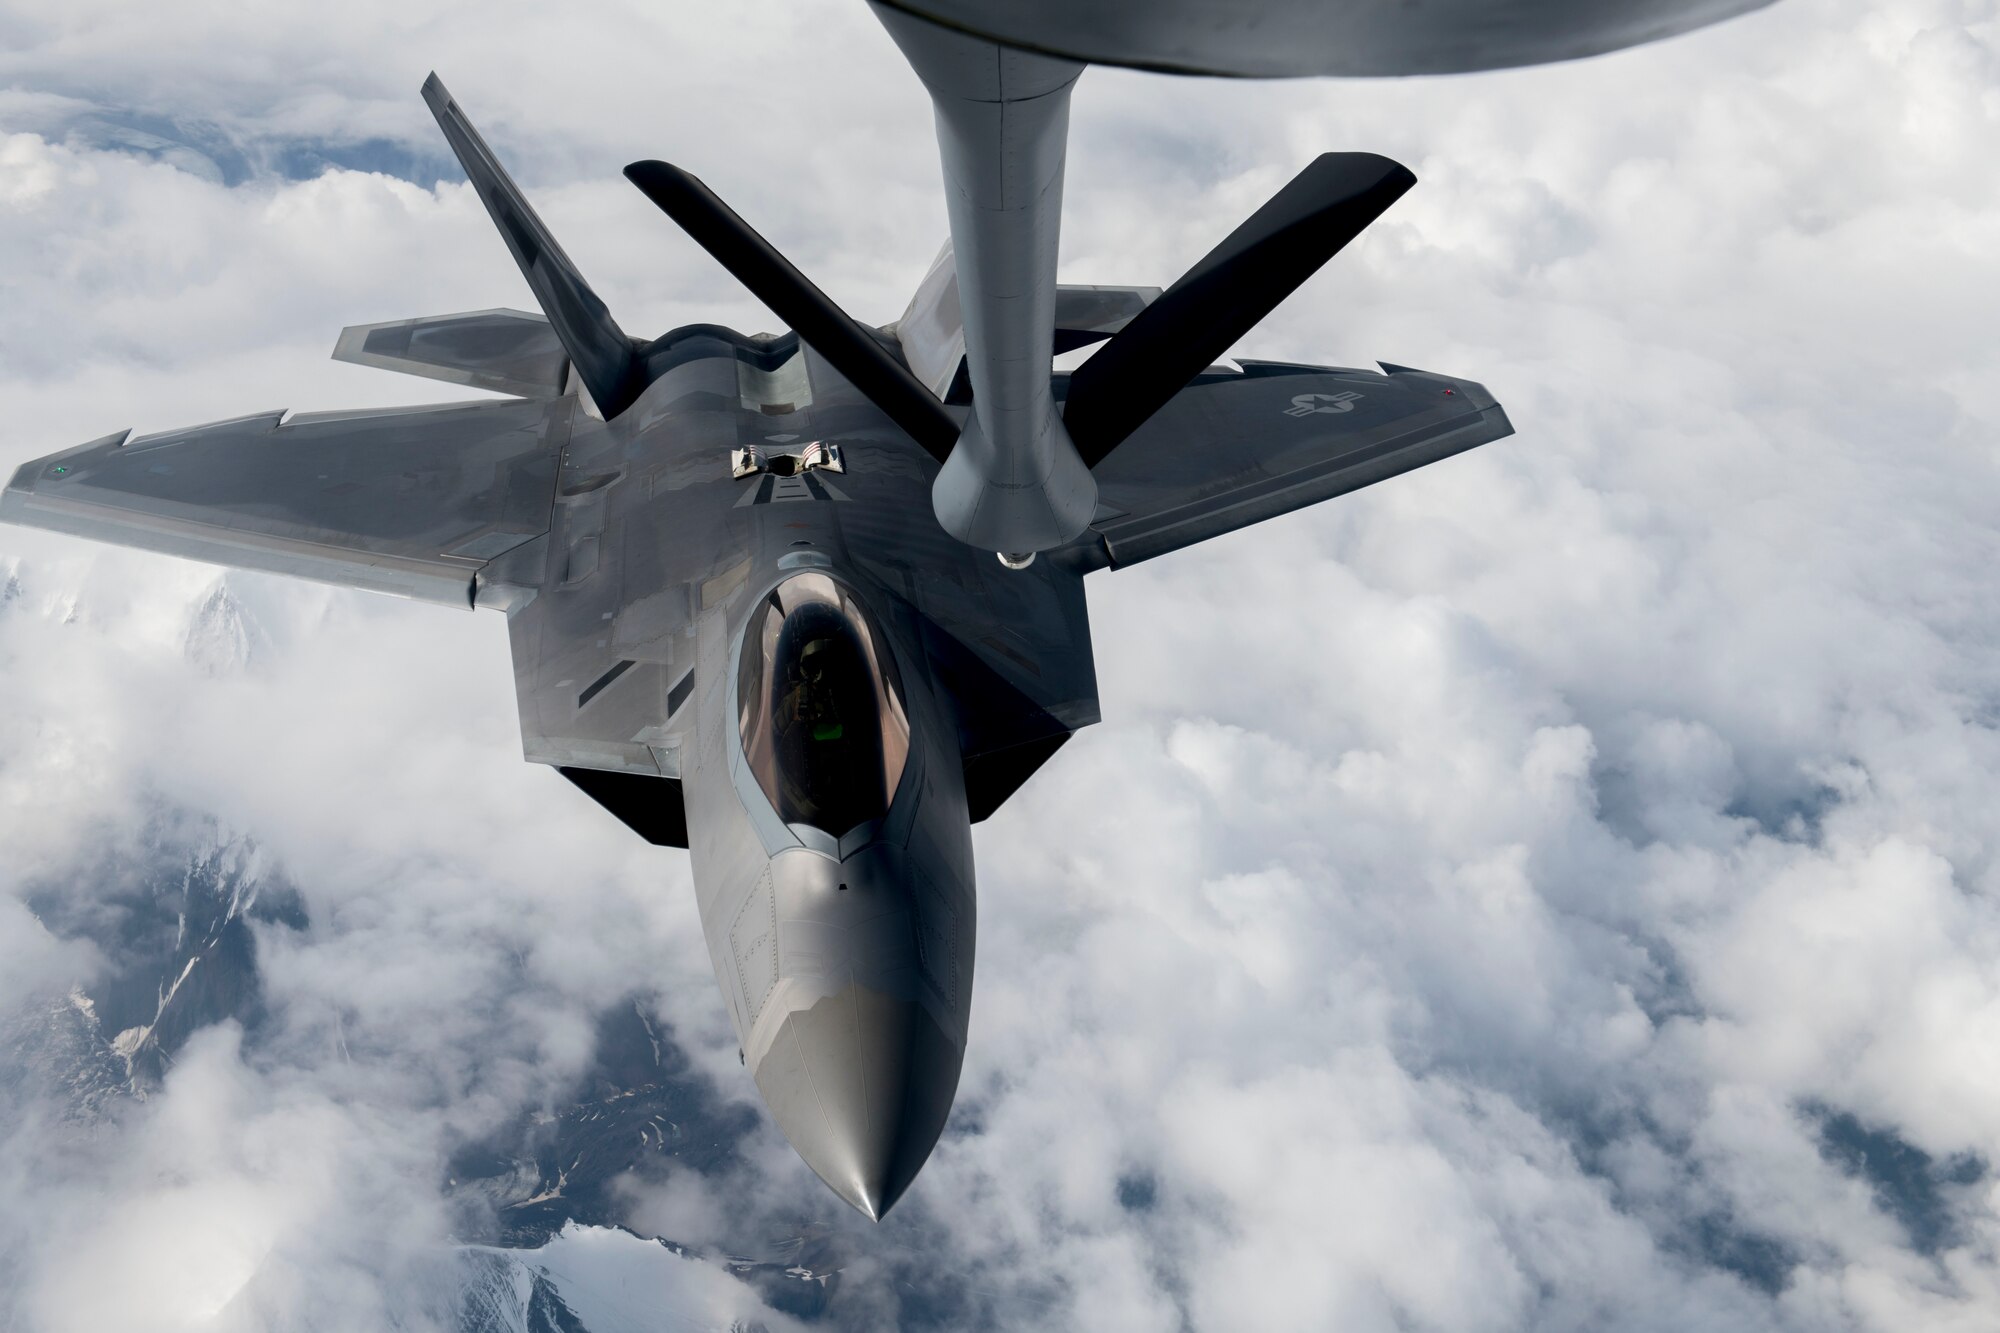 A U.S. Air Force F-22 Raptor from the 354th Fighter Wing prepares to be air refueled by a KC-135 Stratotanker from the 92nd Air Refueling Wing during field training exercise Red Flag Alaska 20-3, Aug. 4, 2020. RFA 20-3 is a Pacific Air Force directed field training exercise for U.S. and international forces flown under simulated air combat conditions. (U.S. Air Force Photo by Senior Airman Lawrence Sena)